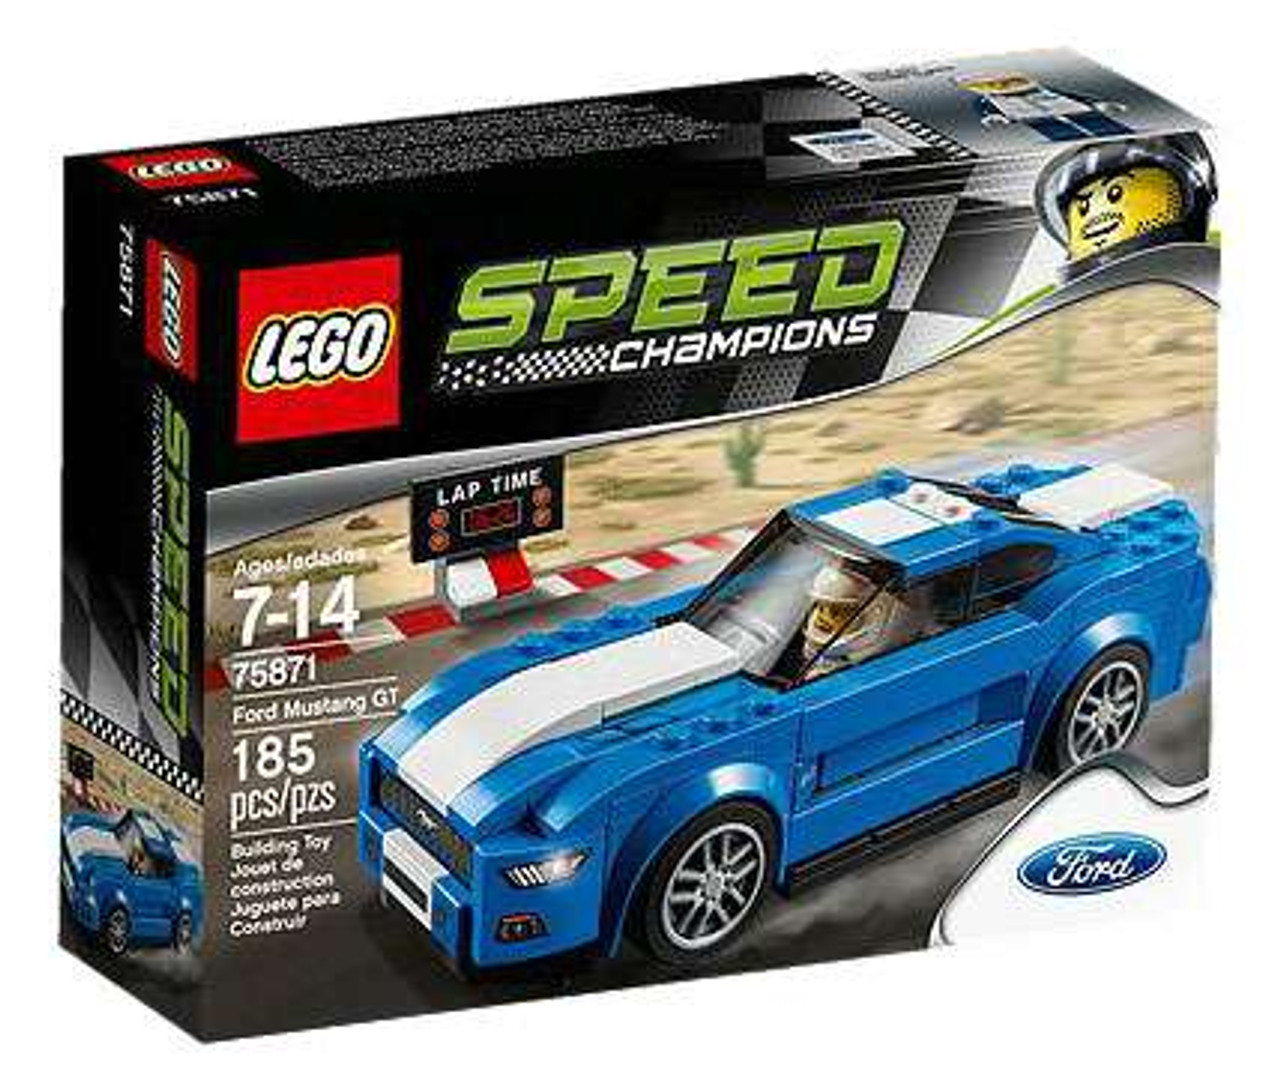 LEGO Speed Champions Ford Mustang GT Set 75871 ToyWiz